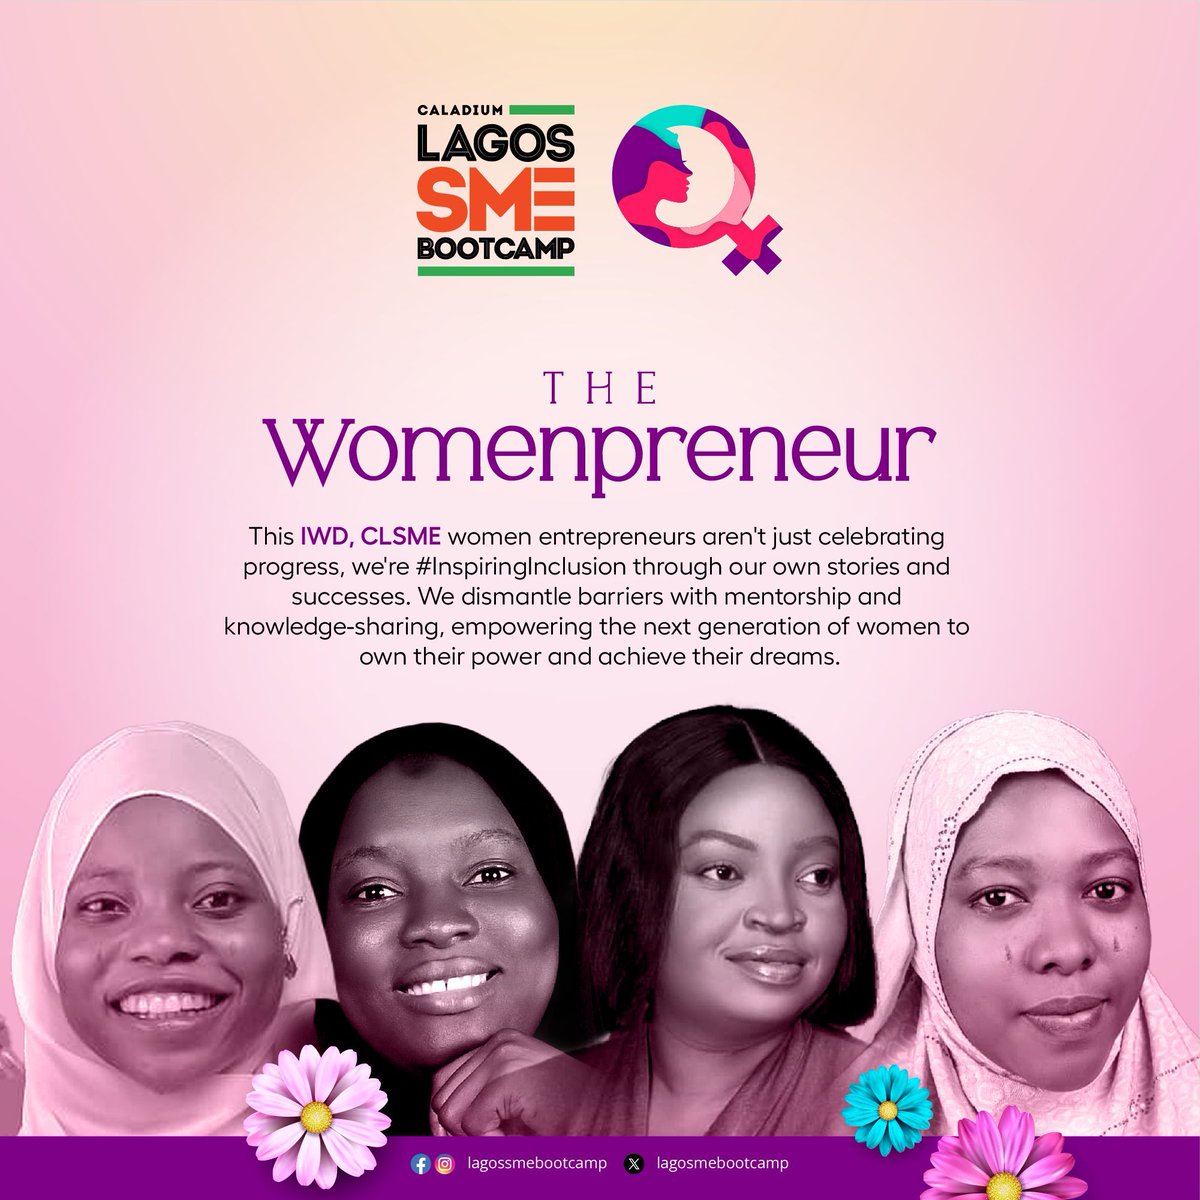 Happy International Women’s Day, CLSME Womenpreneurs! Y'all are crushing it! Your leadership & passion inspire us to chase dreams & build a brighter future. #iwd2024 #clsme #sme #caladium #caladiumsmecommunity #naijabosslady #inspiringinclusion